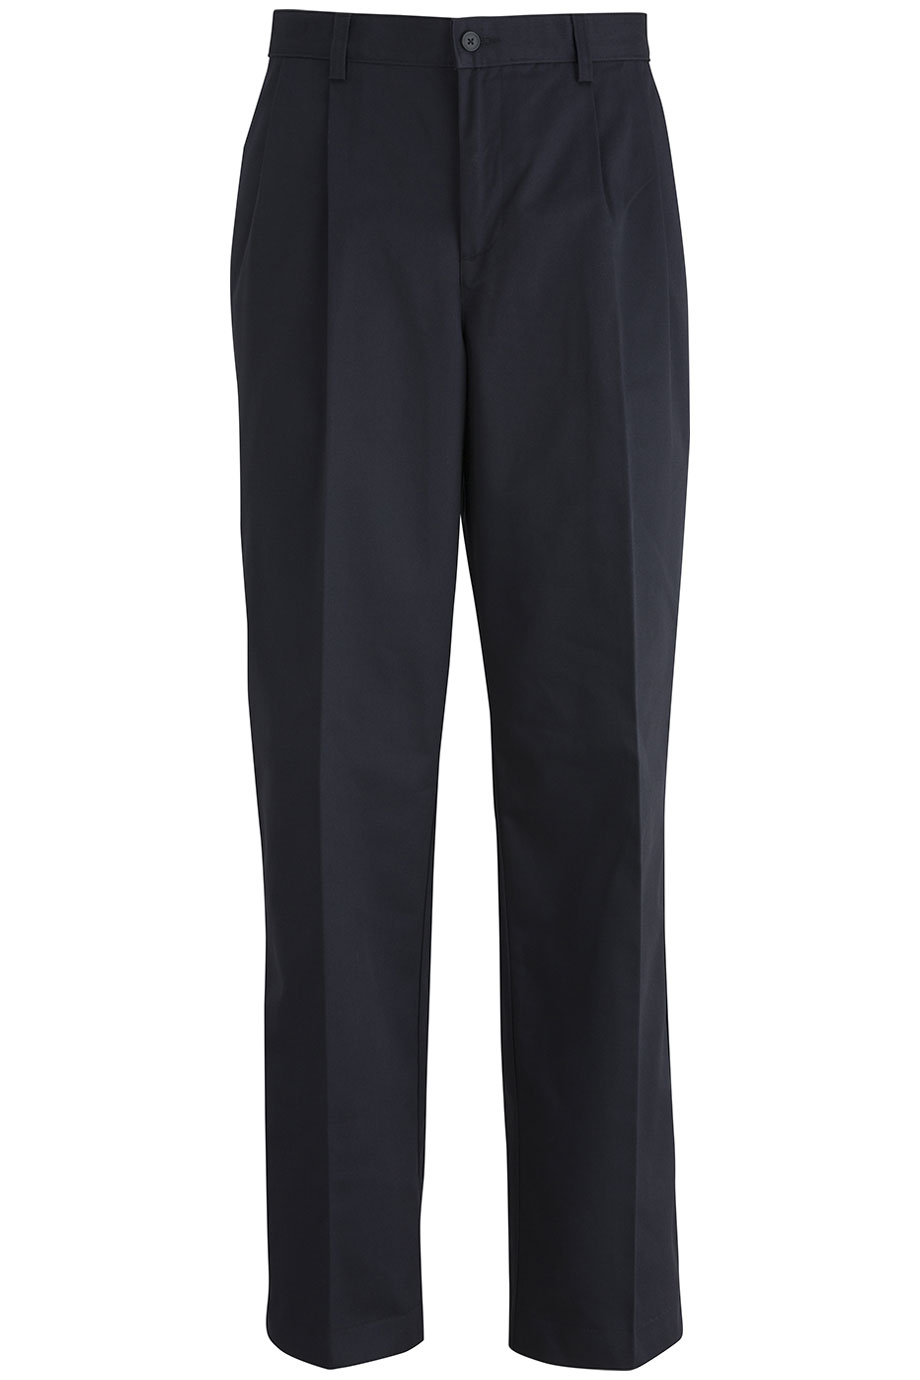 UTILITY CHINO PLEATED FRONT PANT